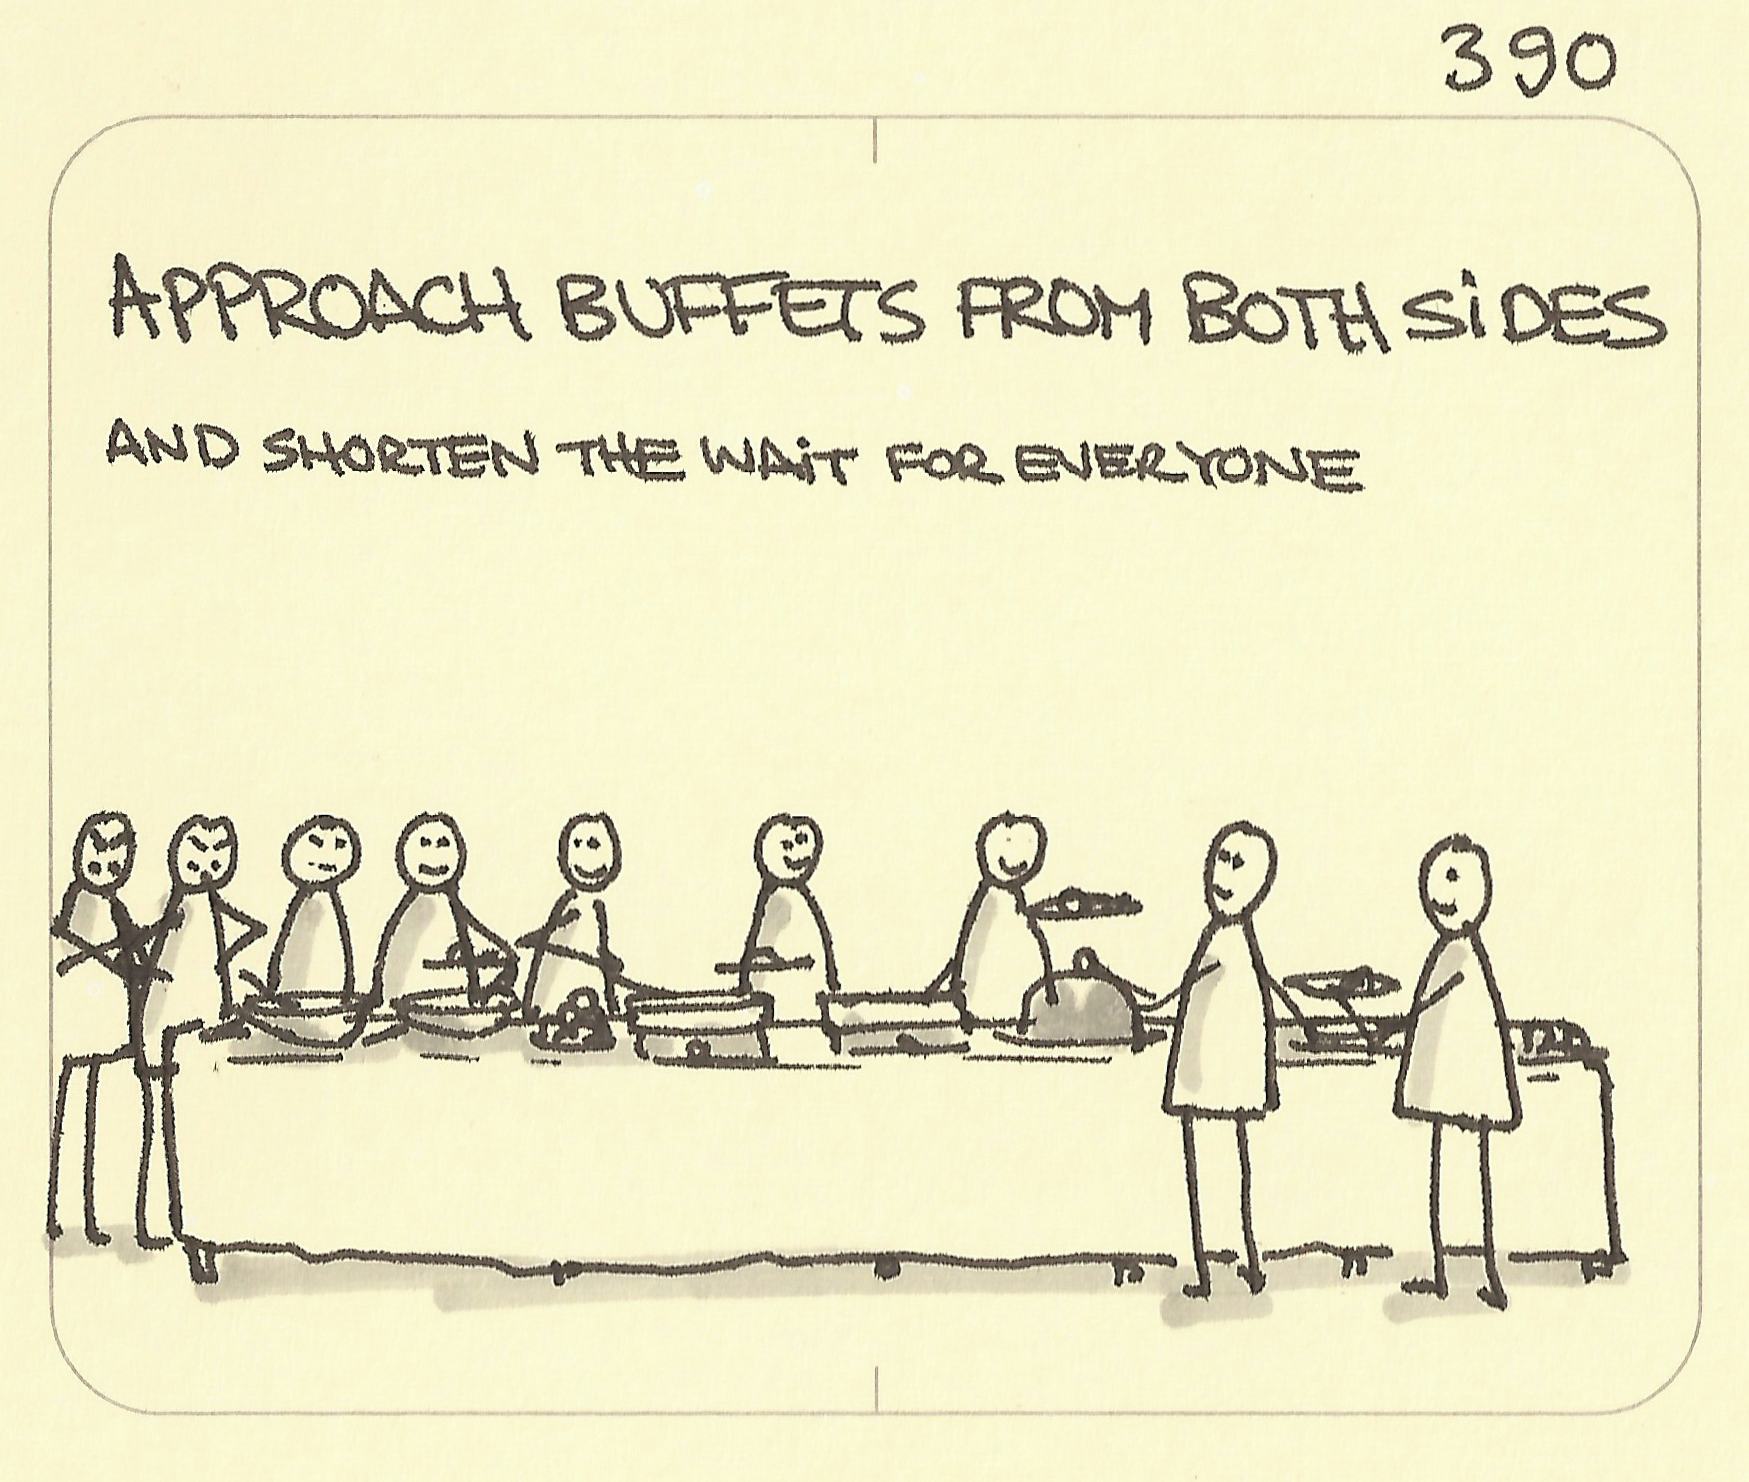 Approach buffets from both sides - Sketchplanations